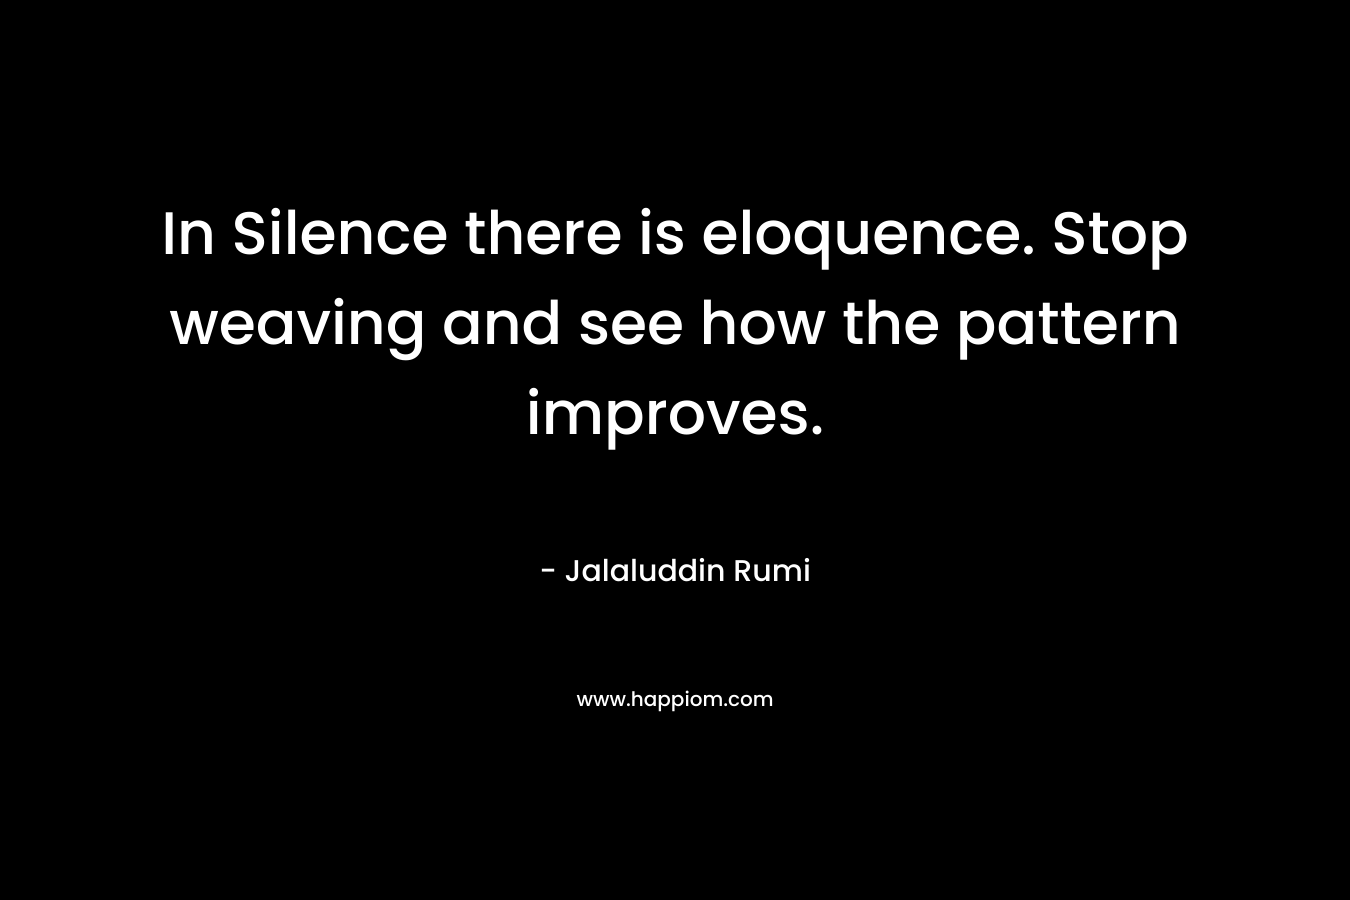 In Silence there is eloquence. Stop weaving and see how the pattern improves.